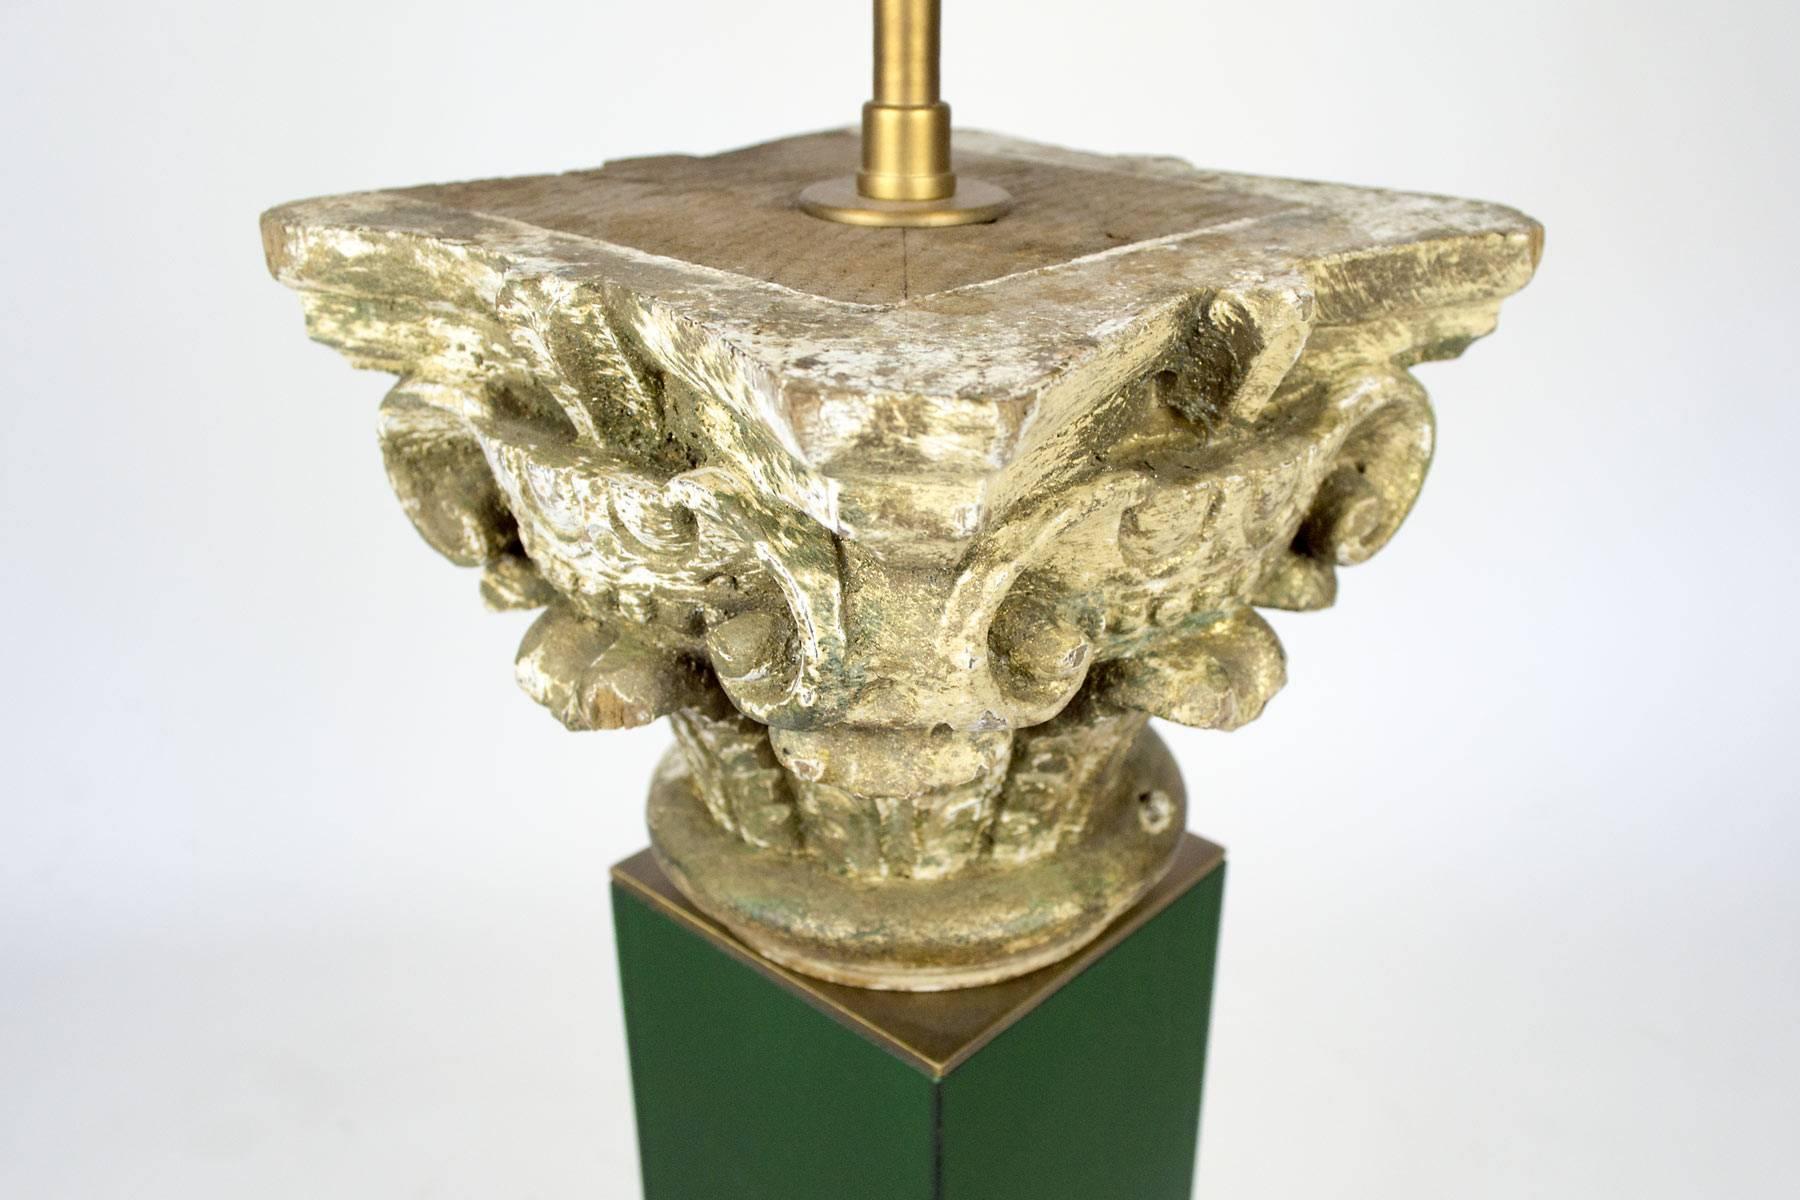 This table lamp has a 18th century carved wood capital mounted on a Plexiglas base. Linen shade with gold foil lining. Lamp is in our NY showroom.